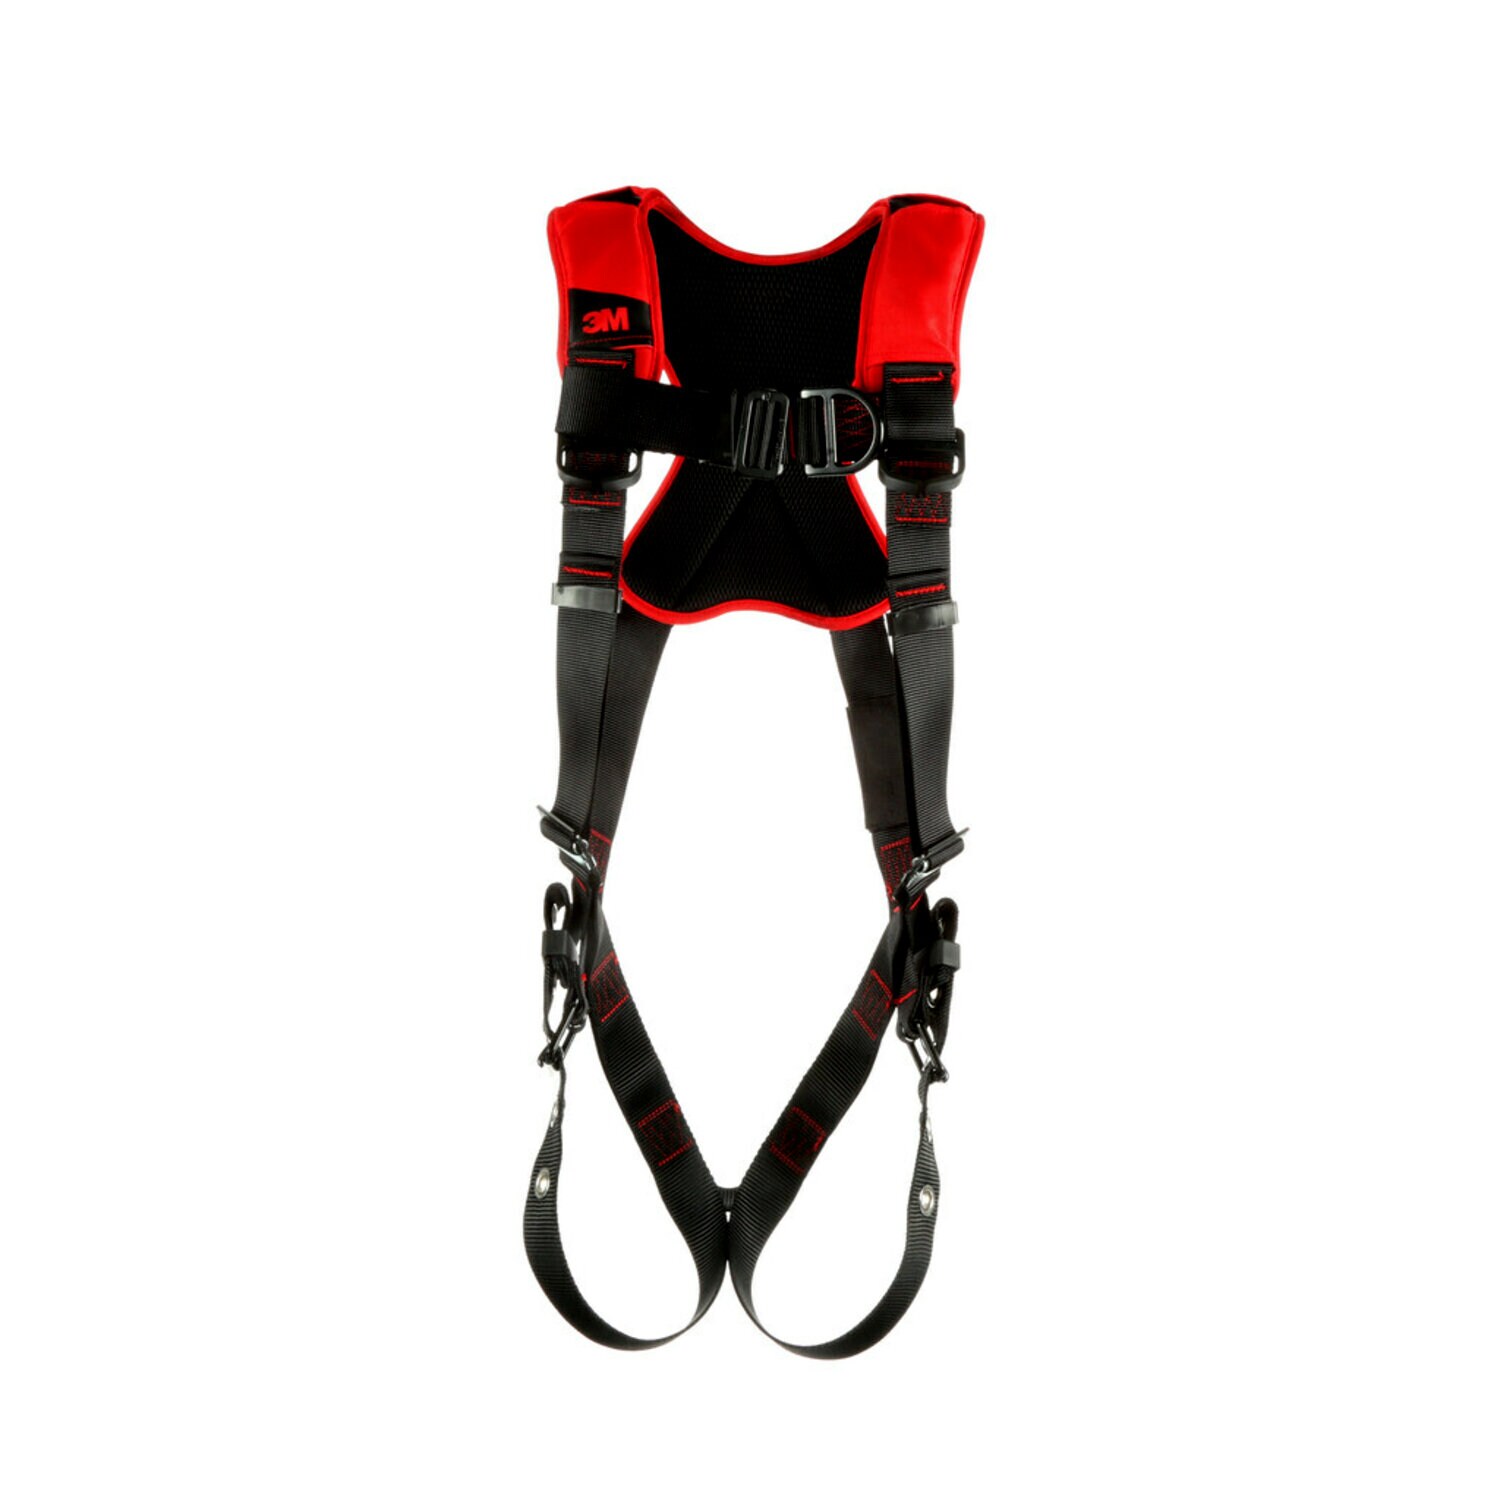 7012816710 - 3M Protecta P200 Comfort Vest Climbing Safety Harness 1161431, X-Large